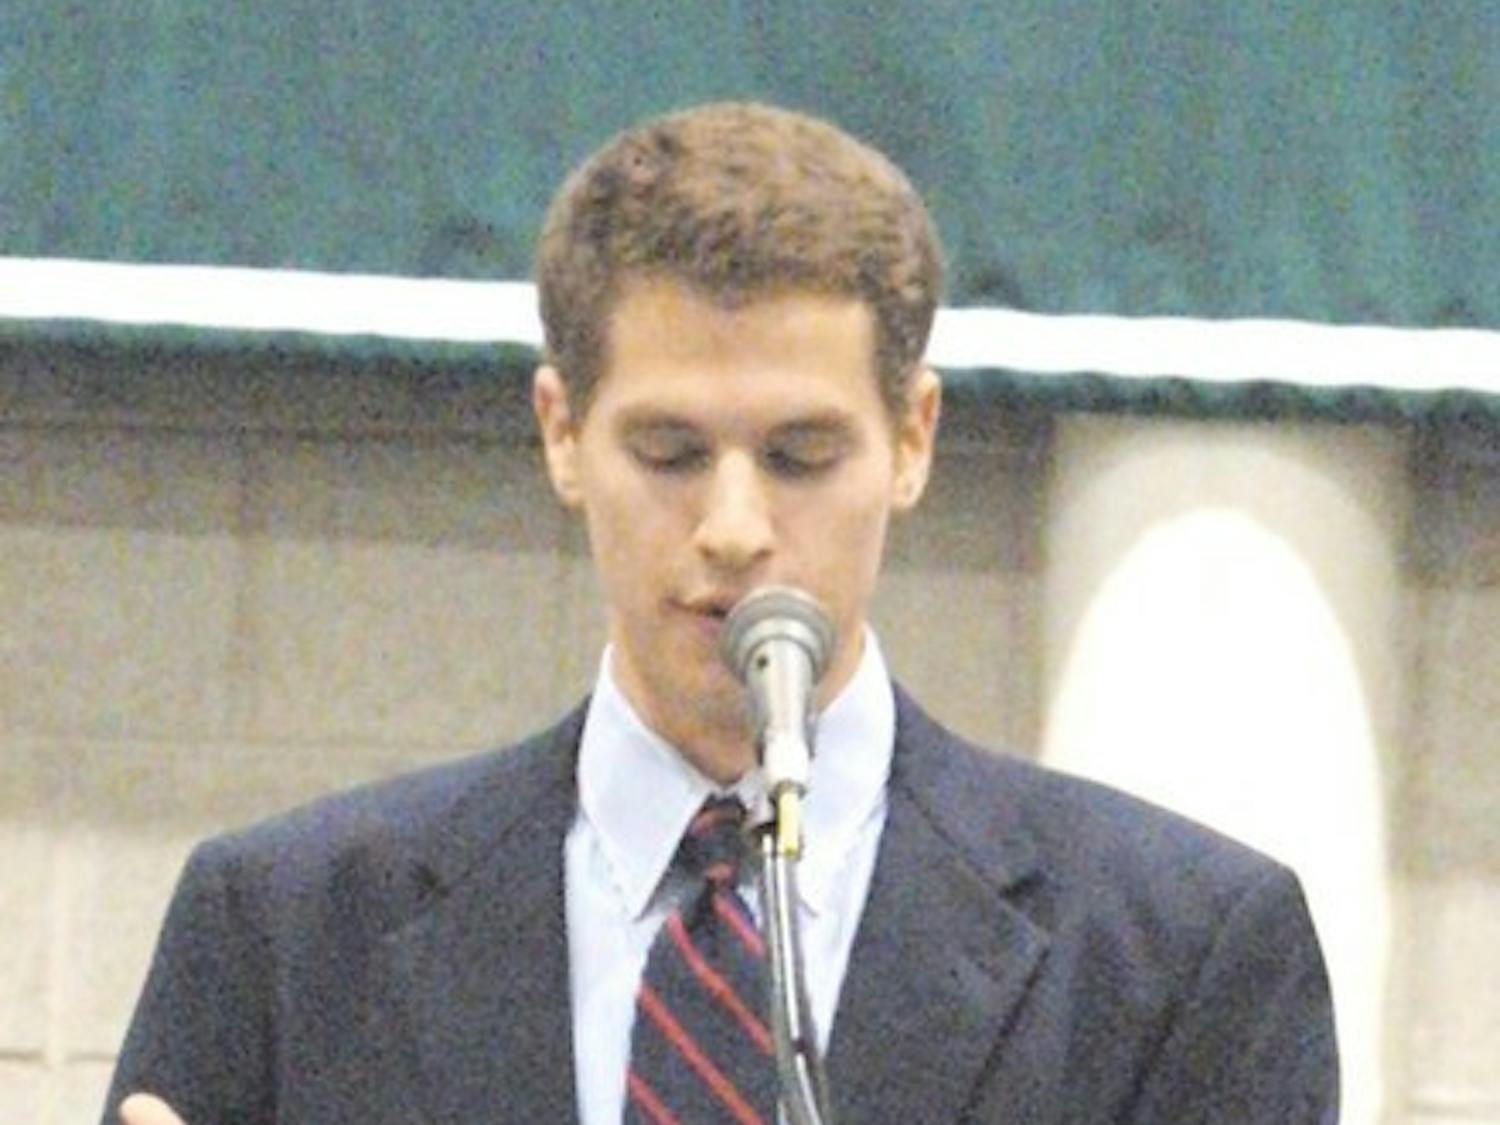 Student Body President Noah Riner '06 delivers a controversial speech at Convocation in September, 2005.